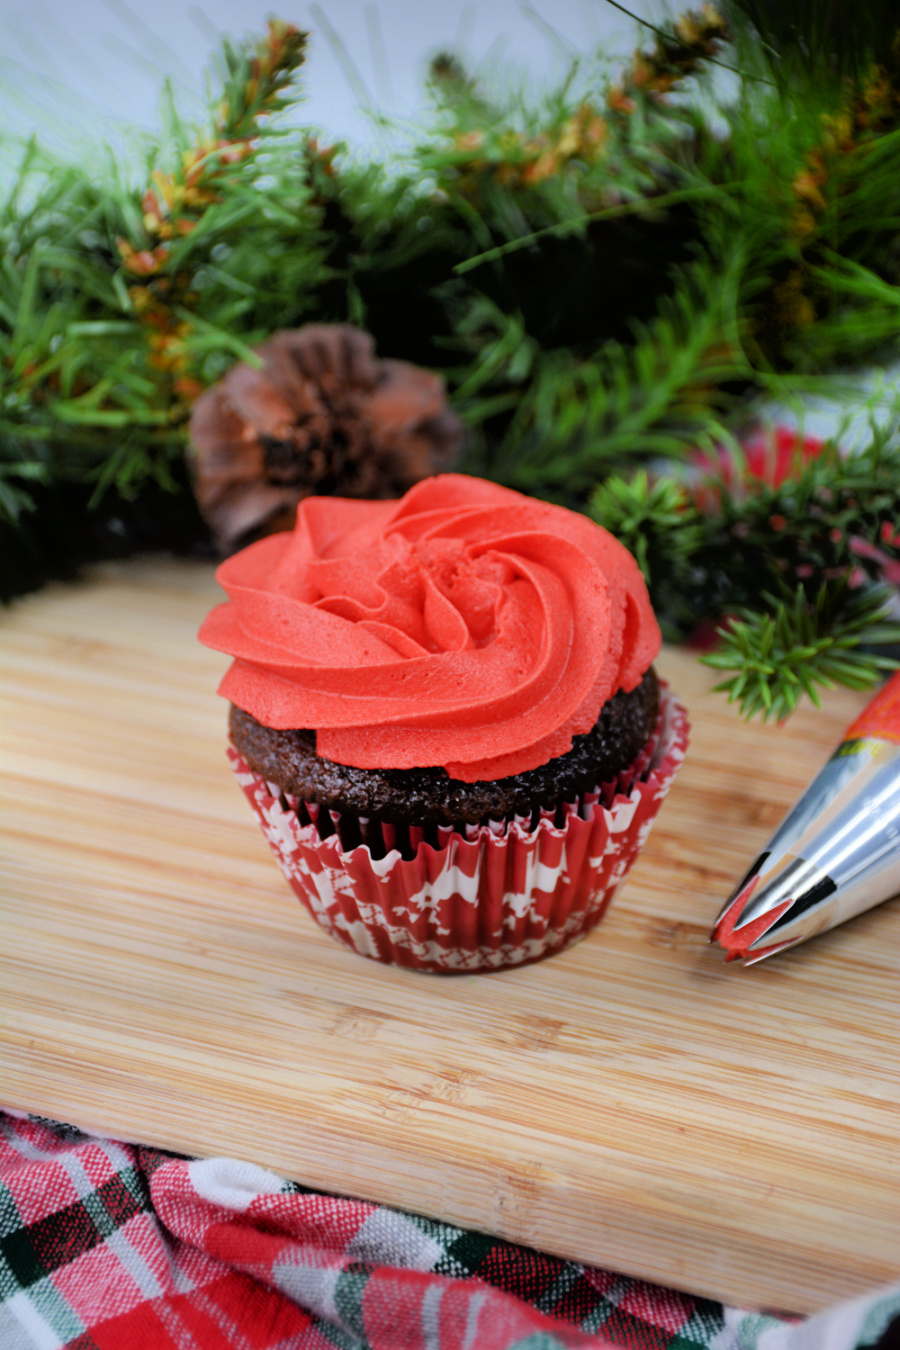 Minnie Mouse Christmas Cupcakes!